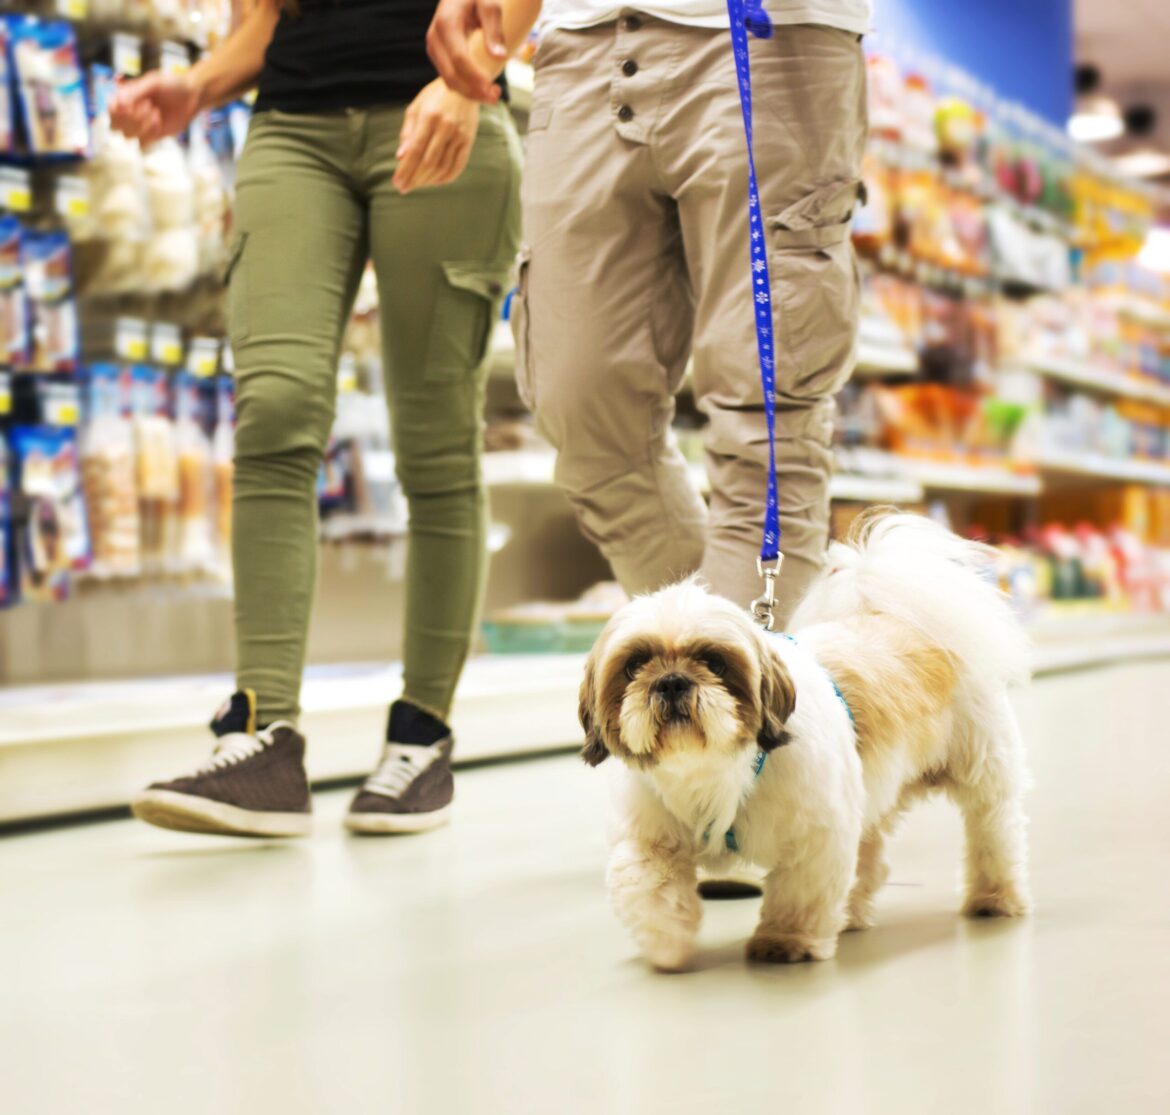 How to Find Dog-Friendly Stores